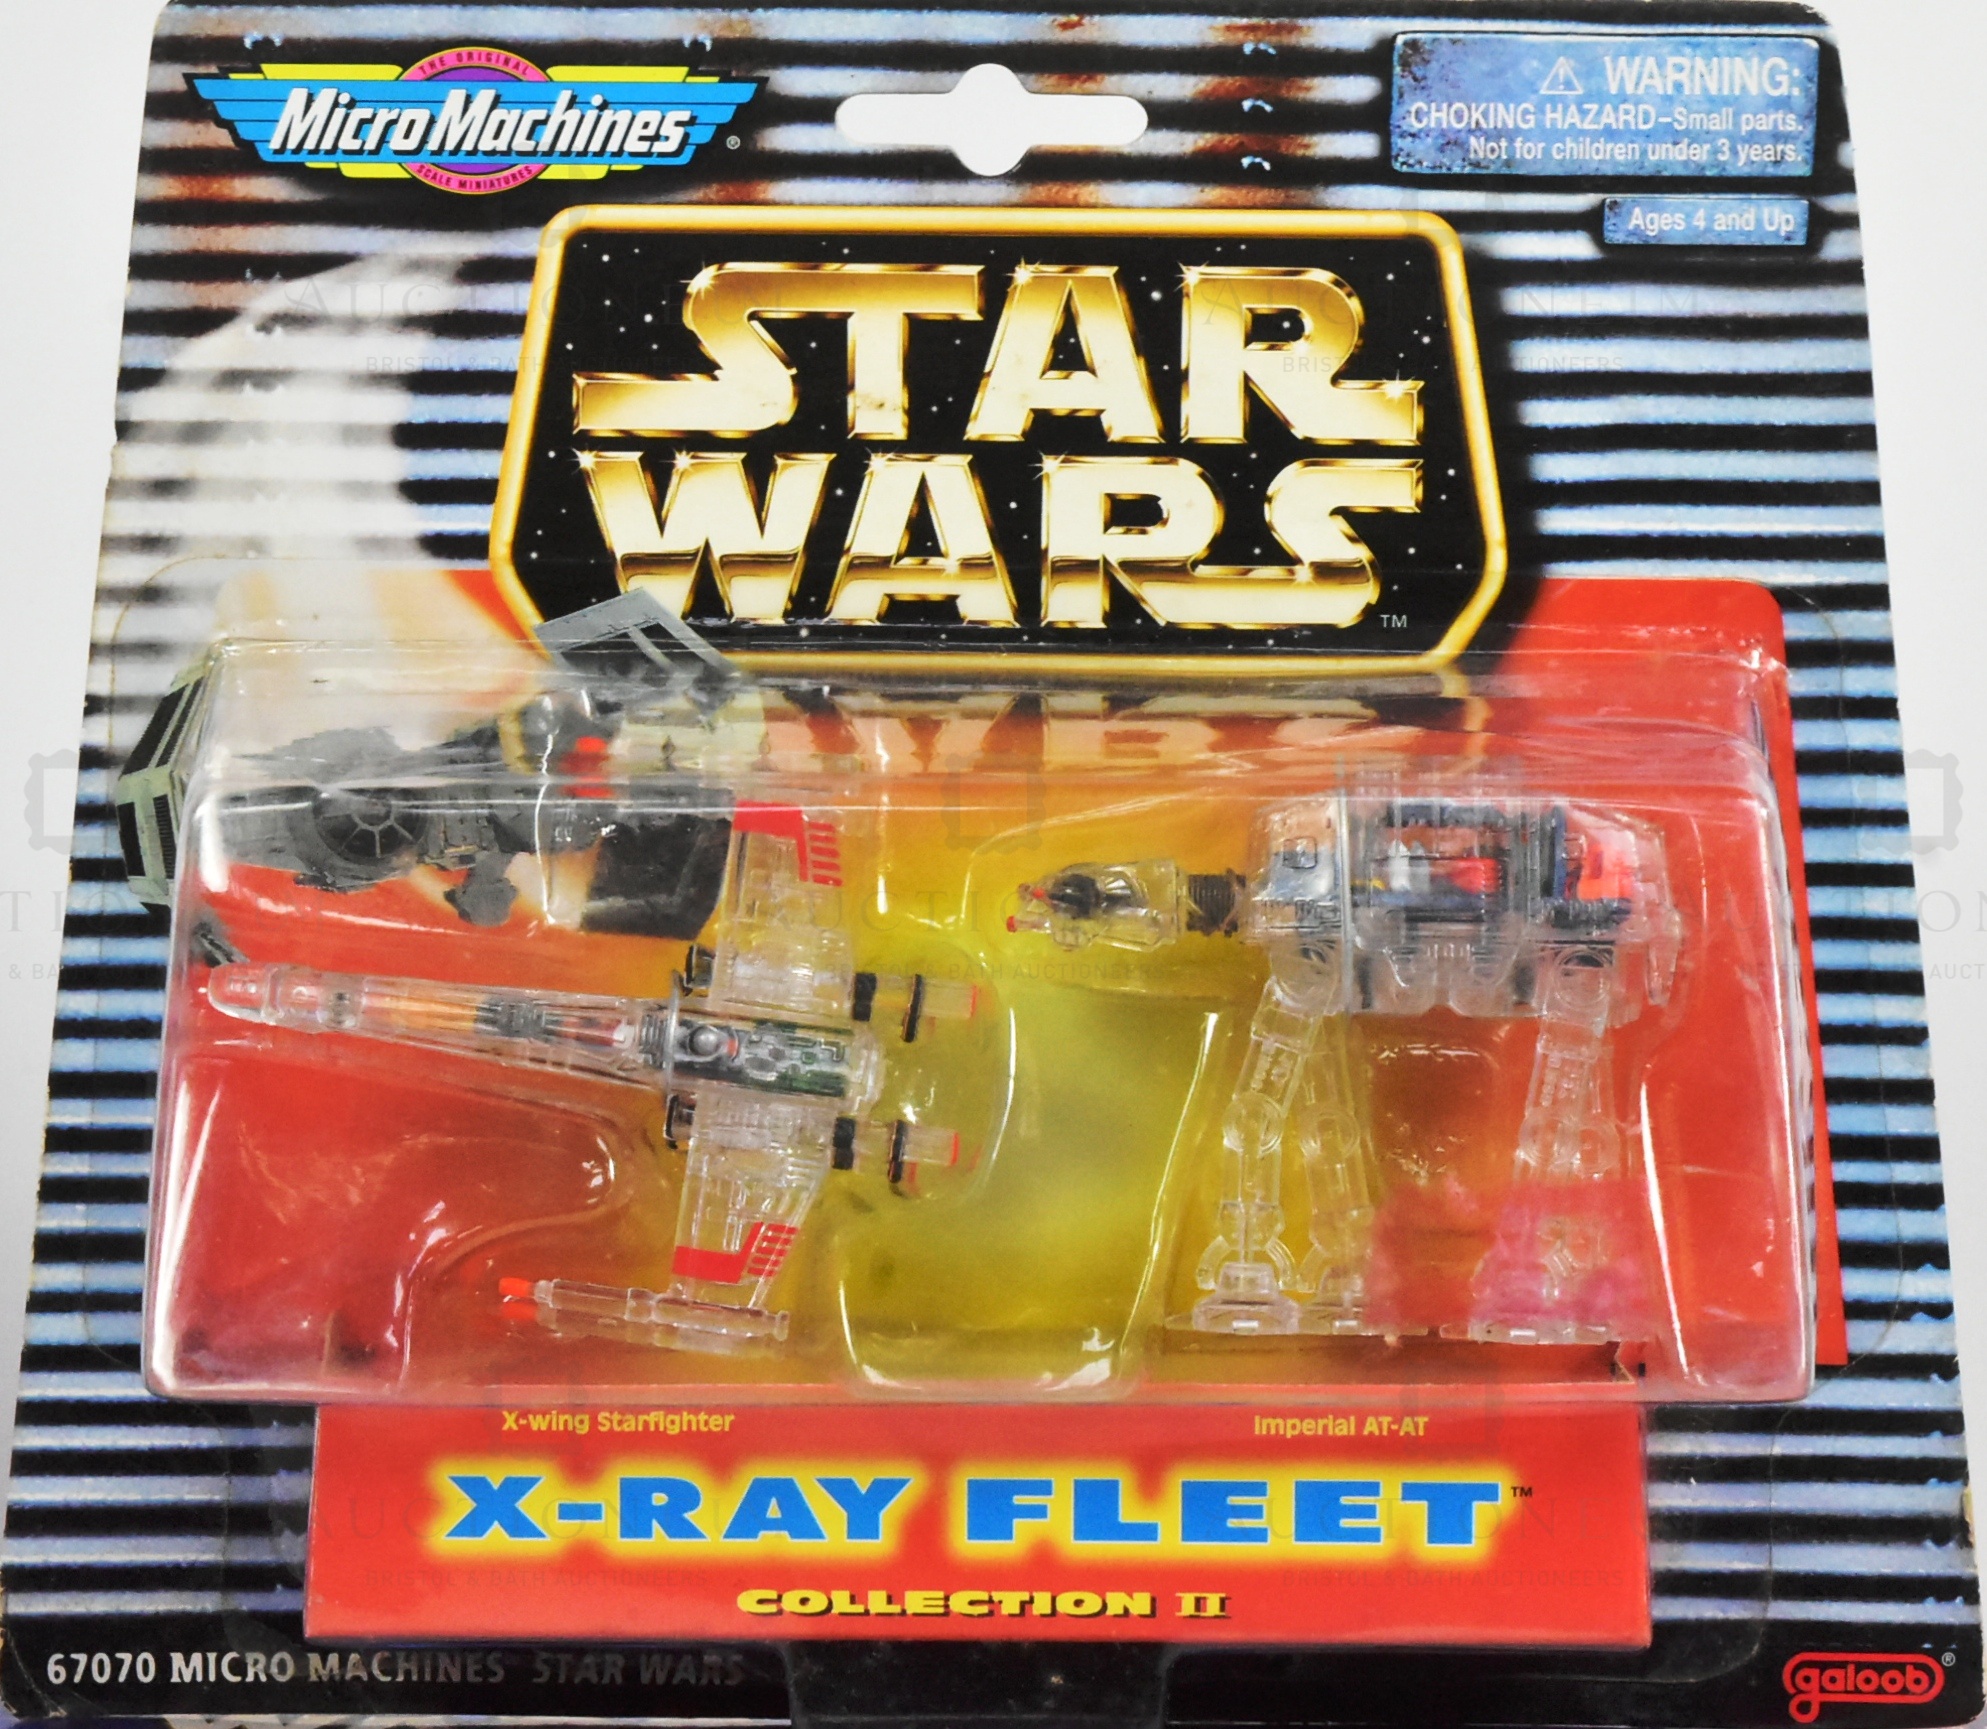 STAR WARS - MICROMACHINES - COLLECTION OF PLAYSETS - Image 2 of 5